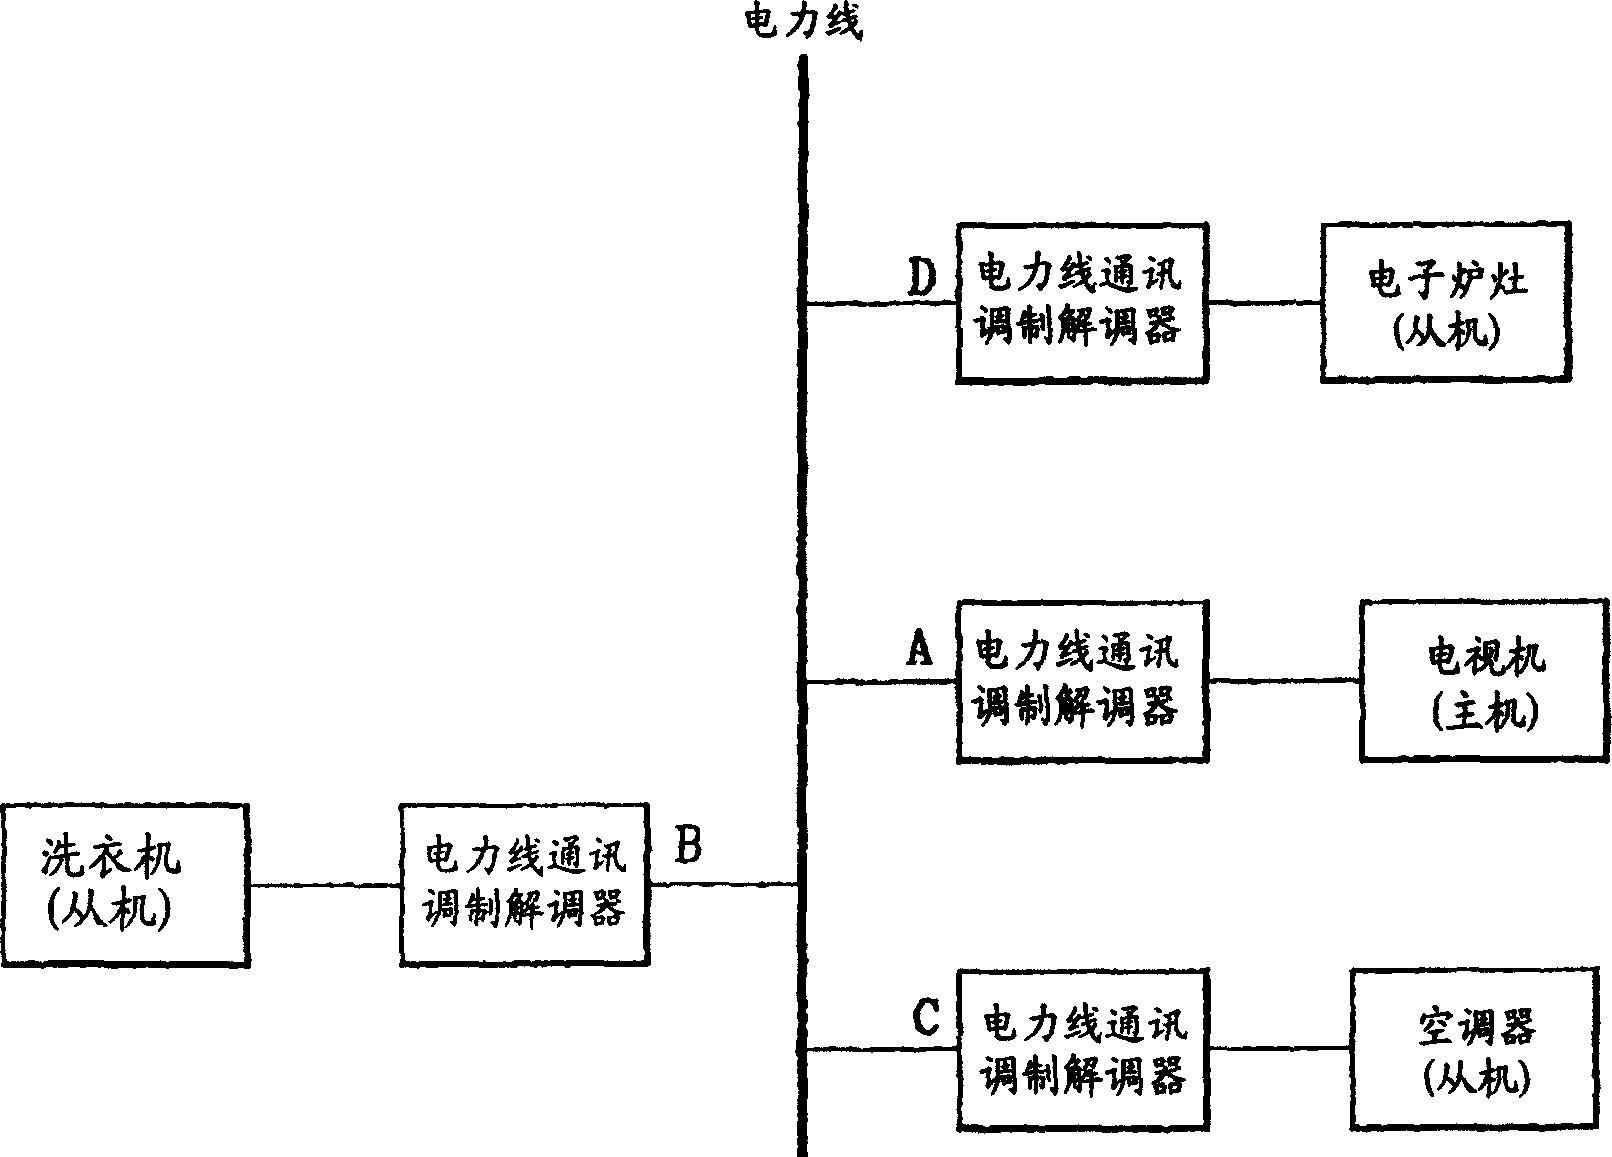 Information display control method for local network system